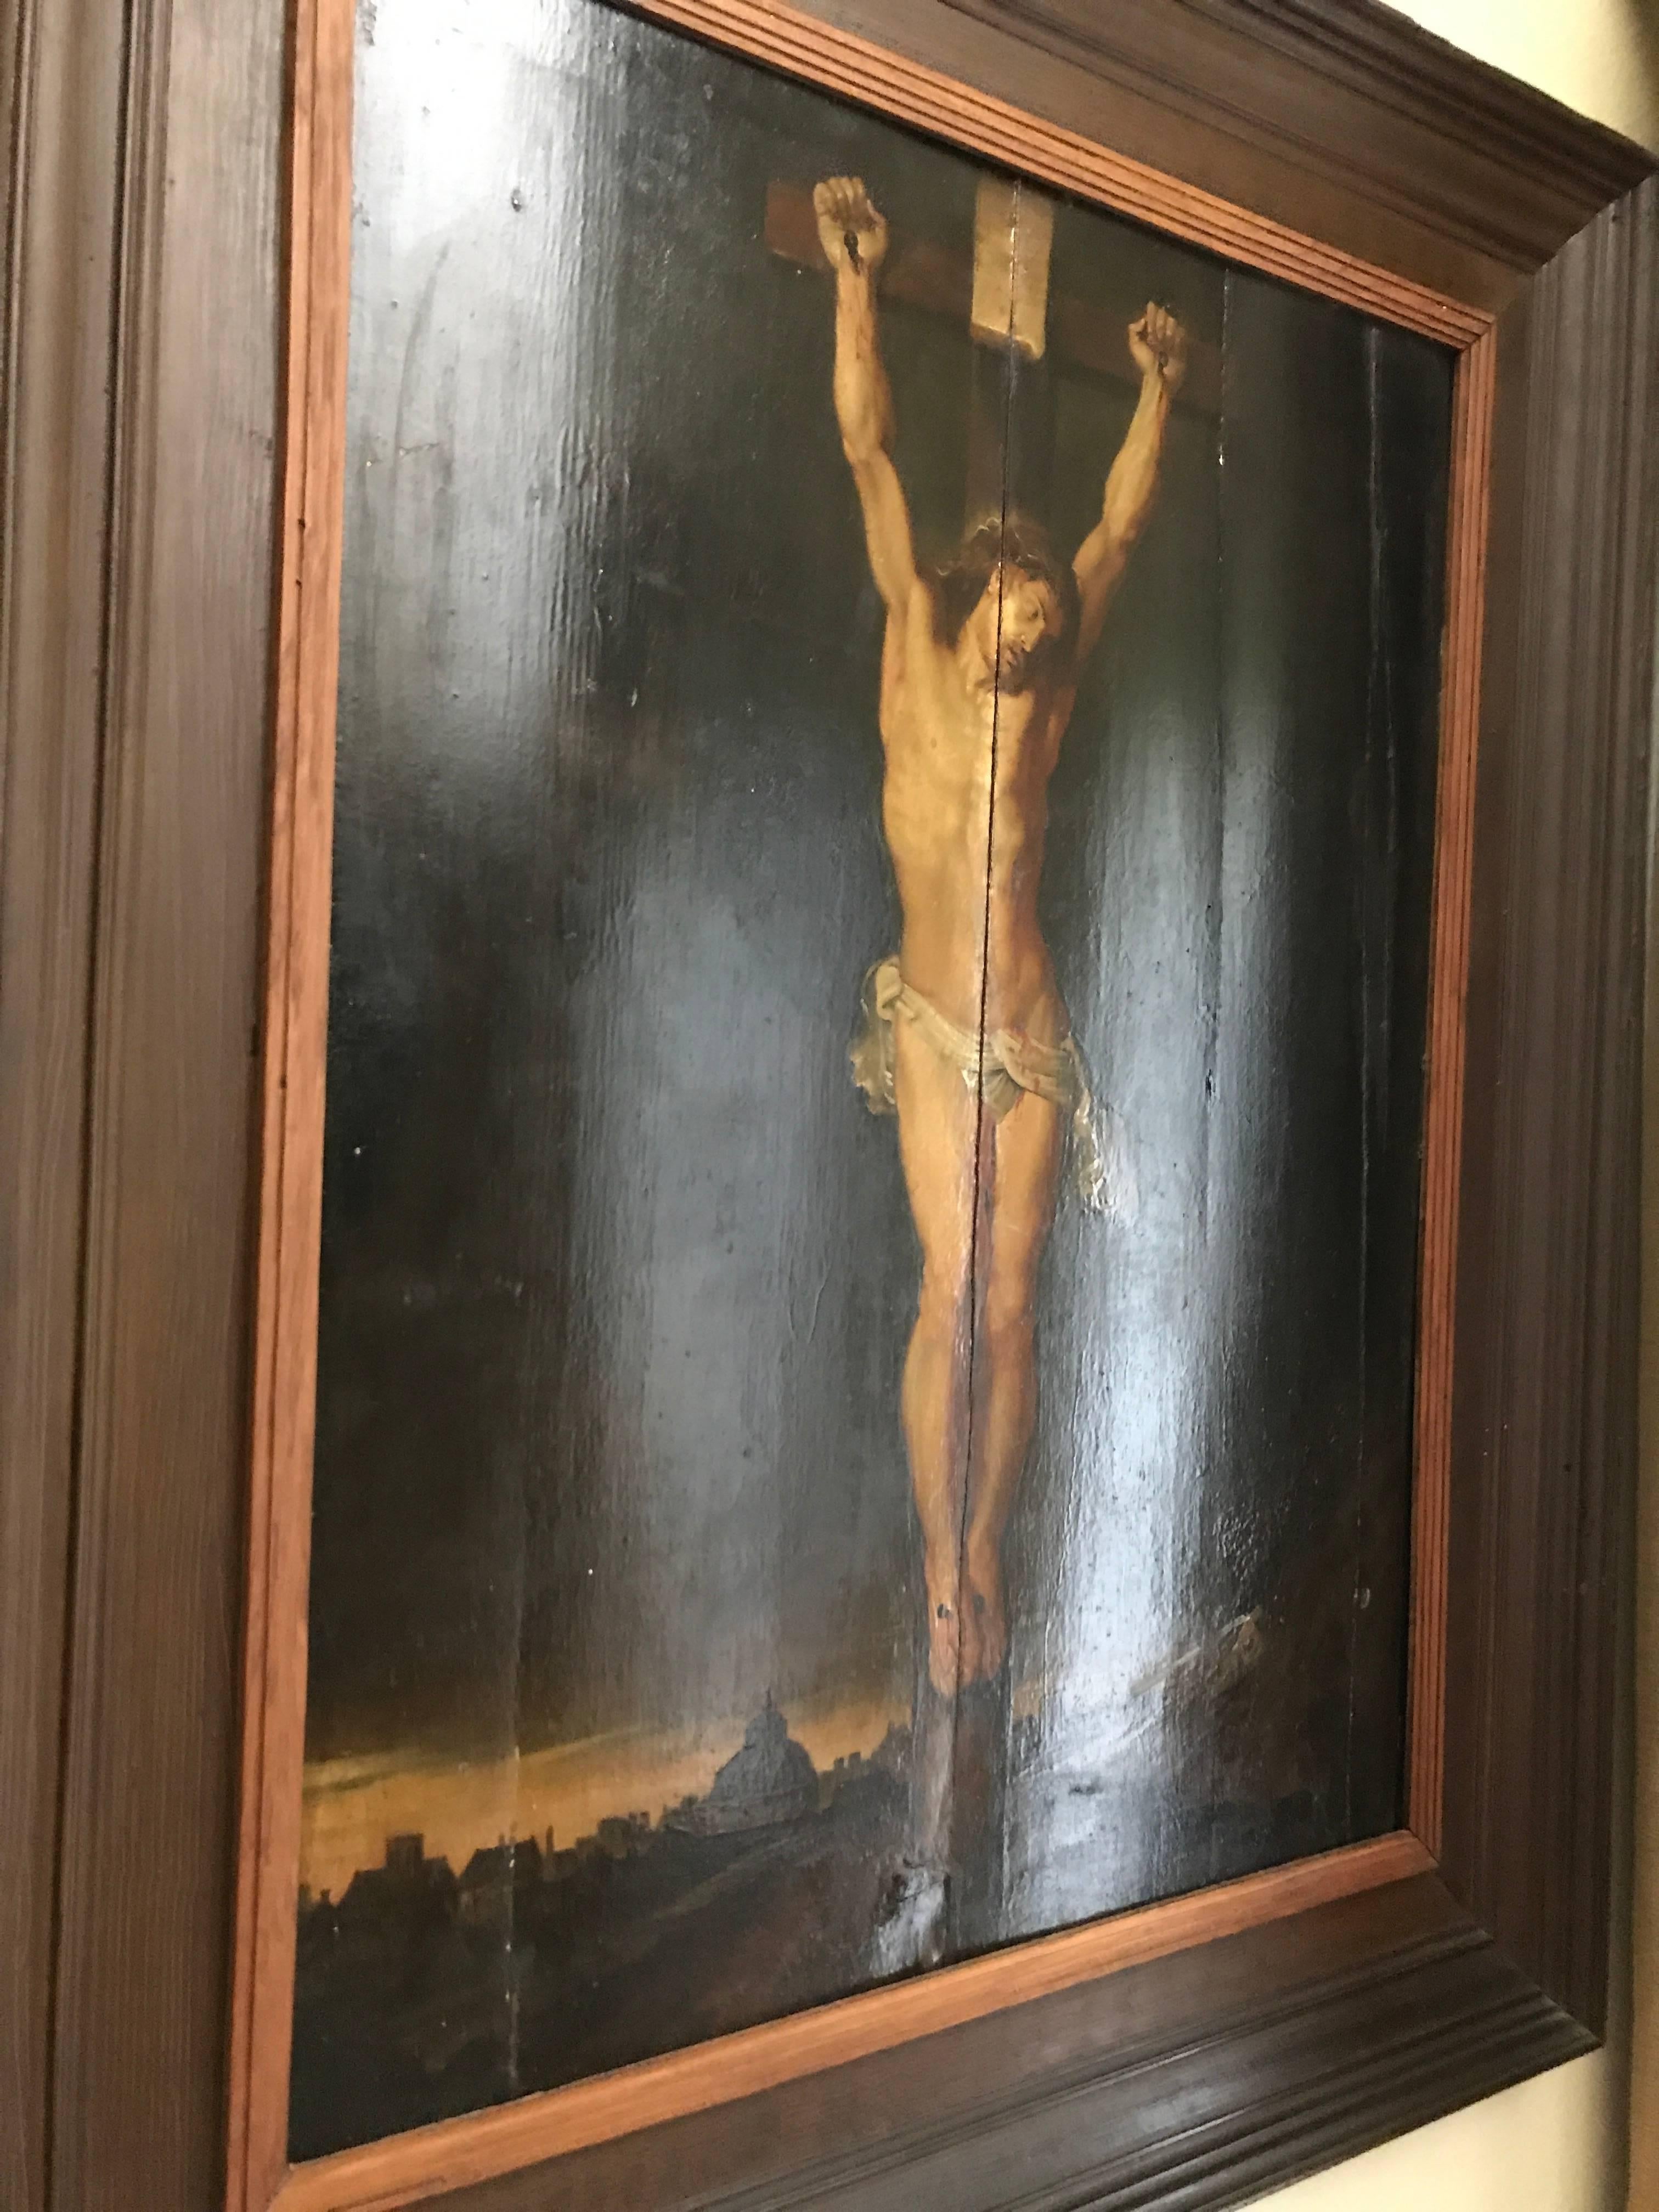 Oil on oak panel 17th century
Crucifixion
Jesus on the cross 
Wonderfull and sad charismatic appearance
natural crack of the oak panel in the middle. Measures: 87 x 72cm.
 